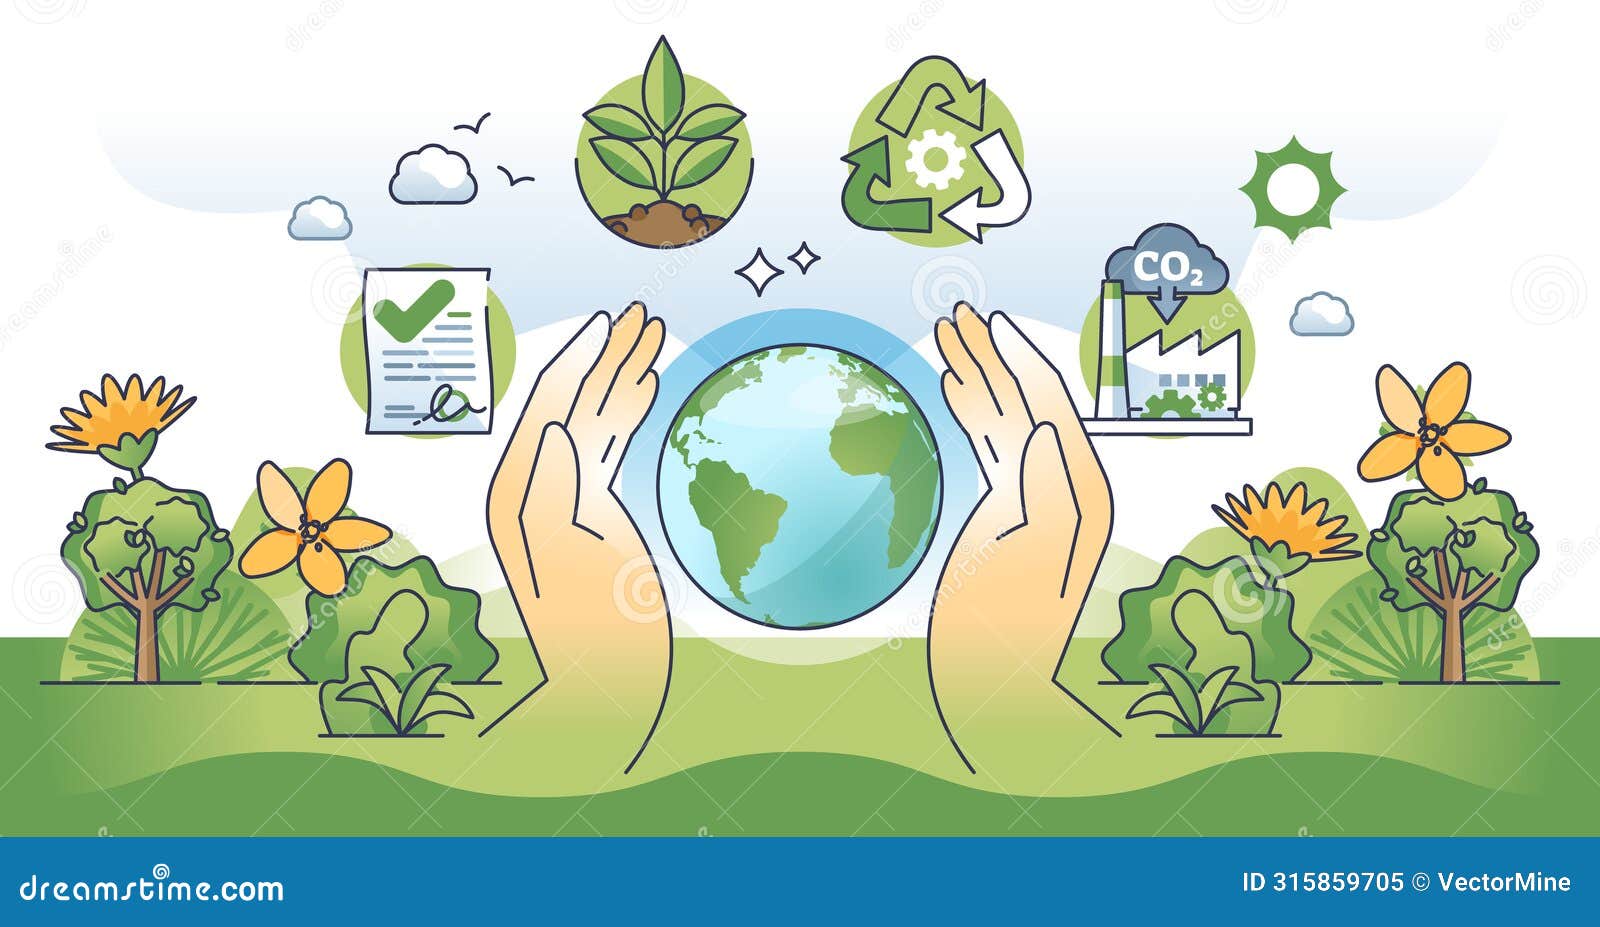 environmental policy and nature protection principles outline hands concept